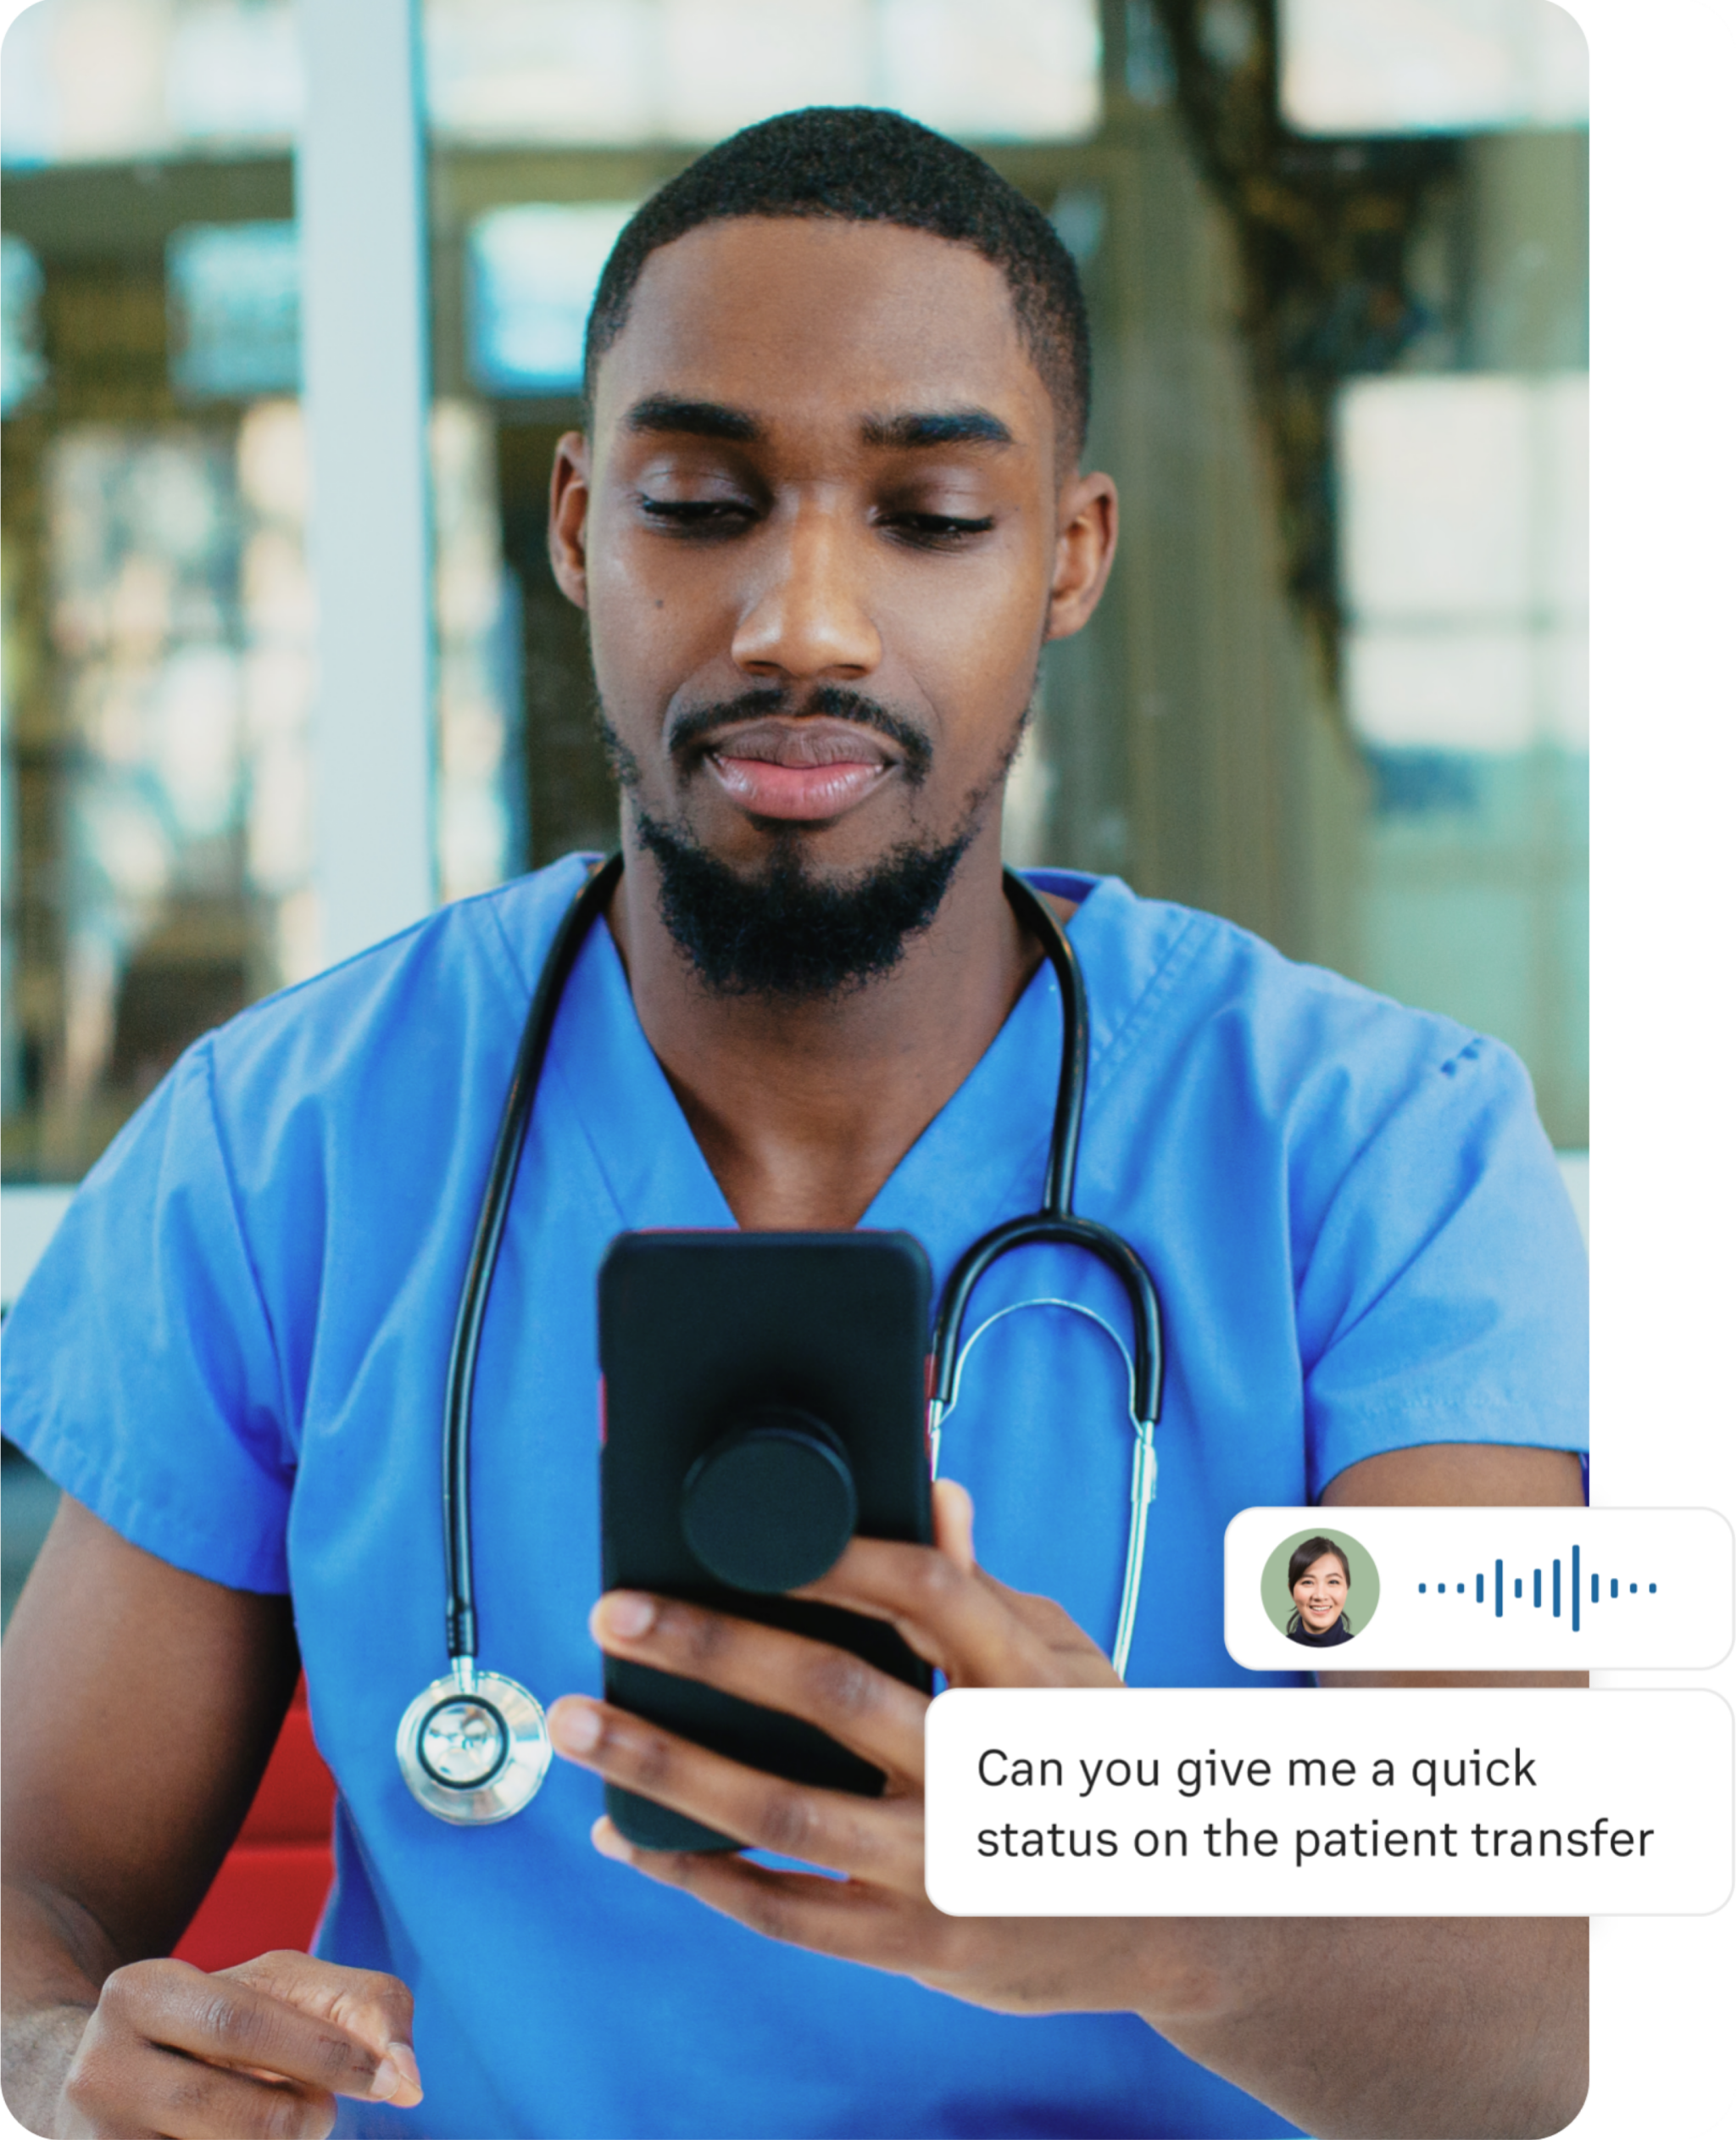 RingCentral for essential workers: Nurse getting a push to talk call from a doctor about patient transfer